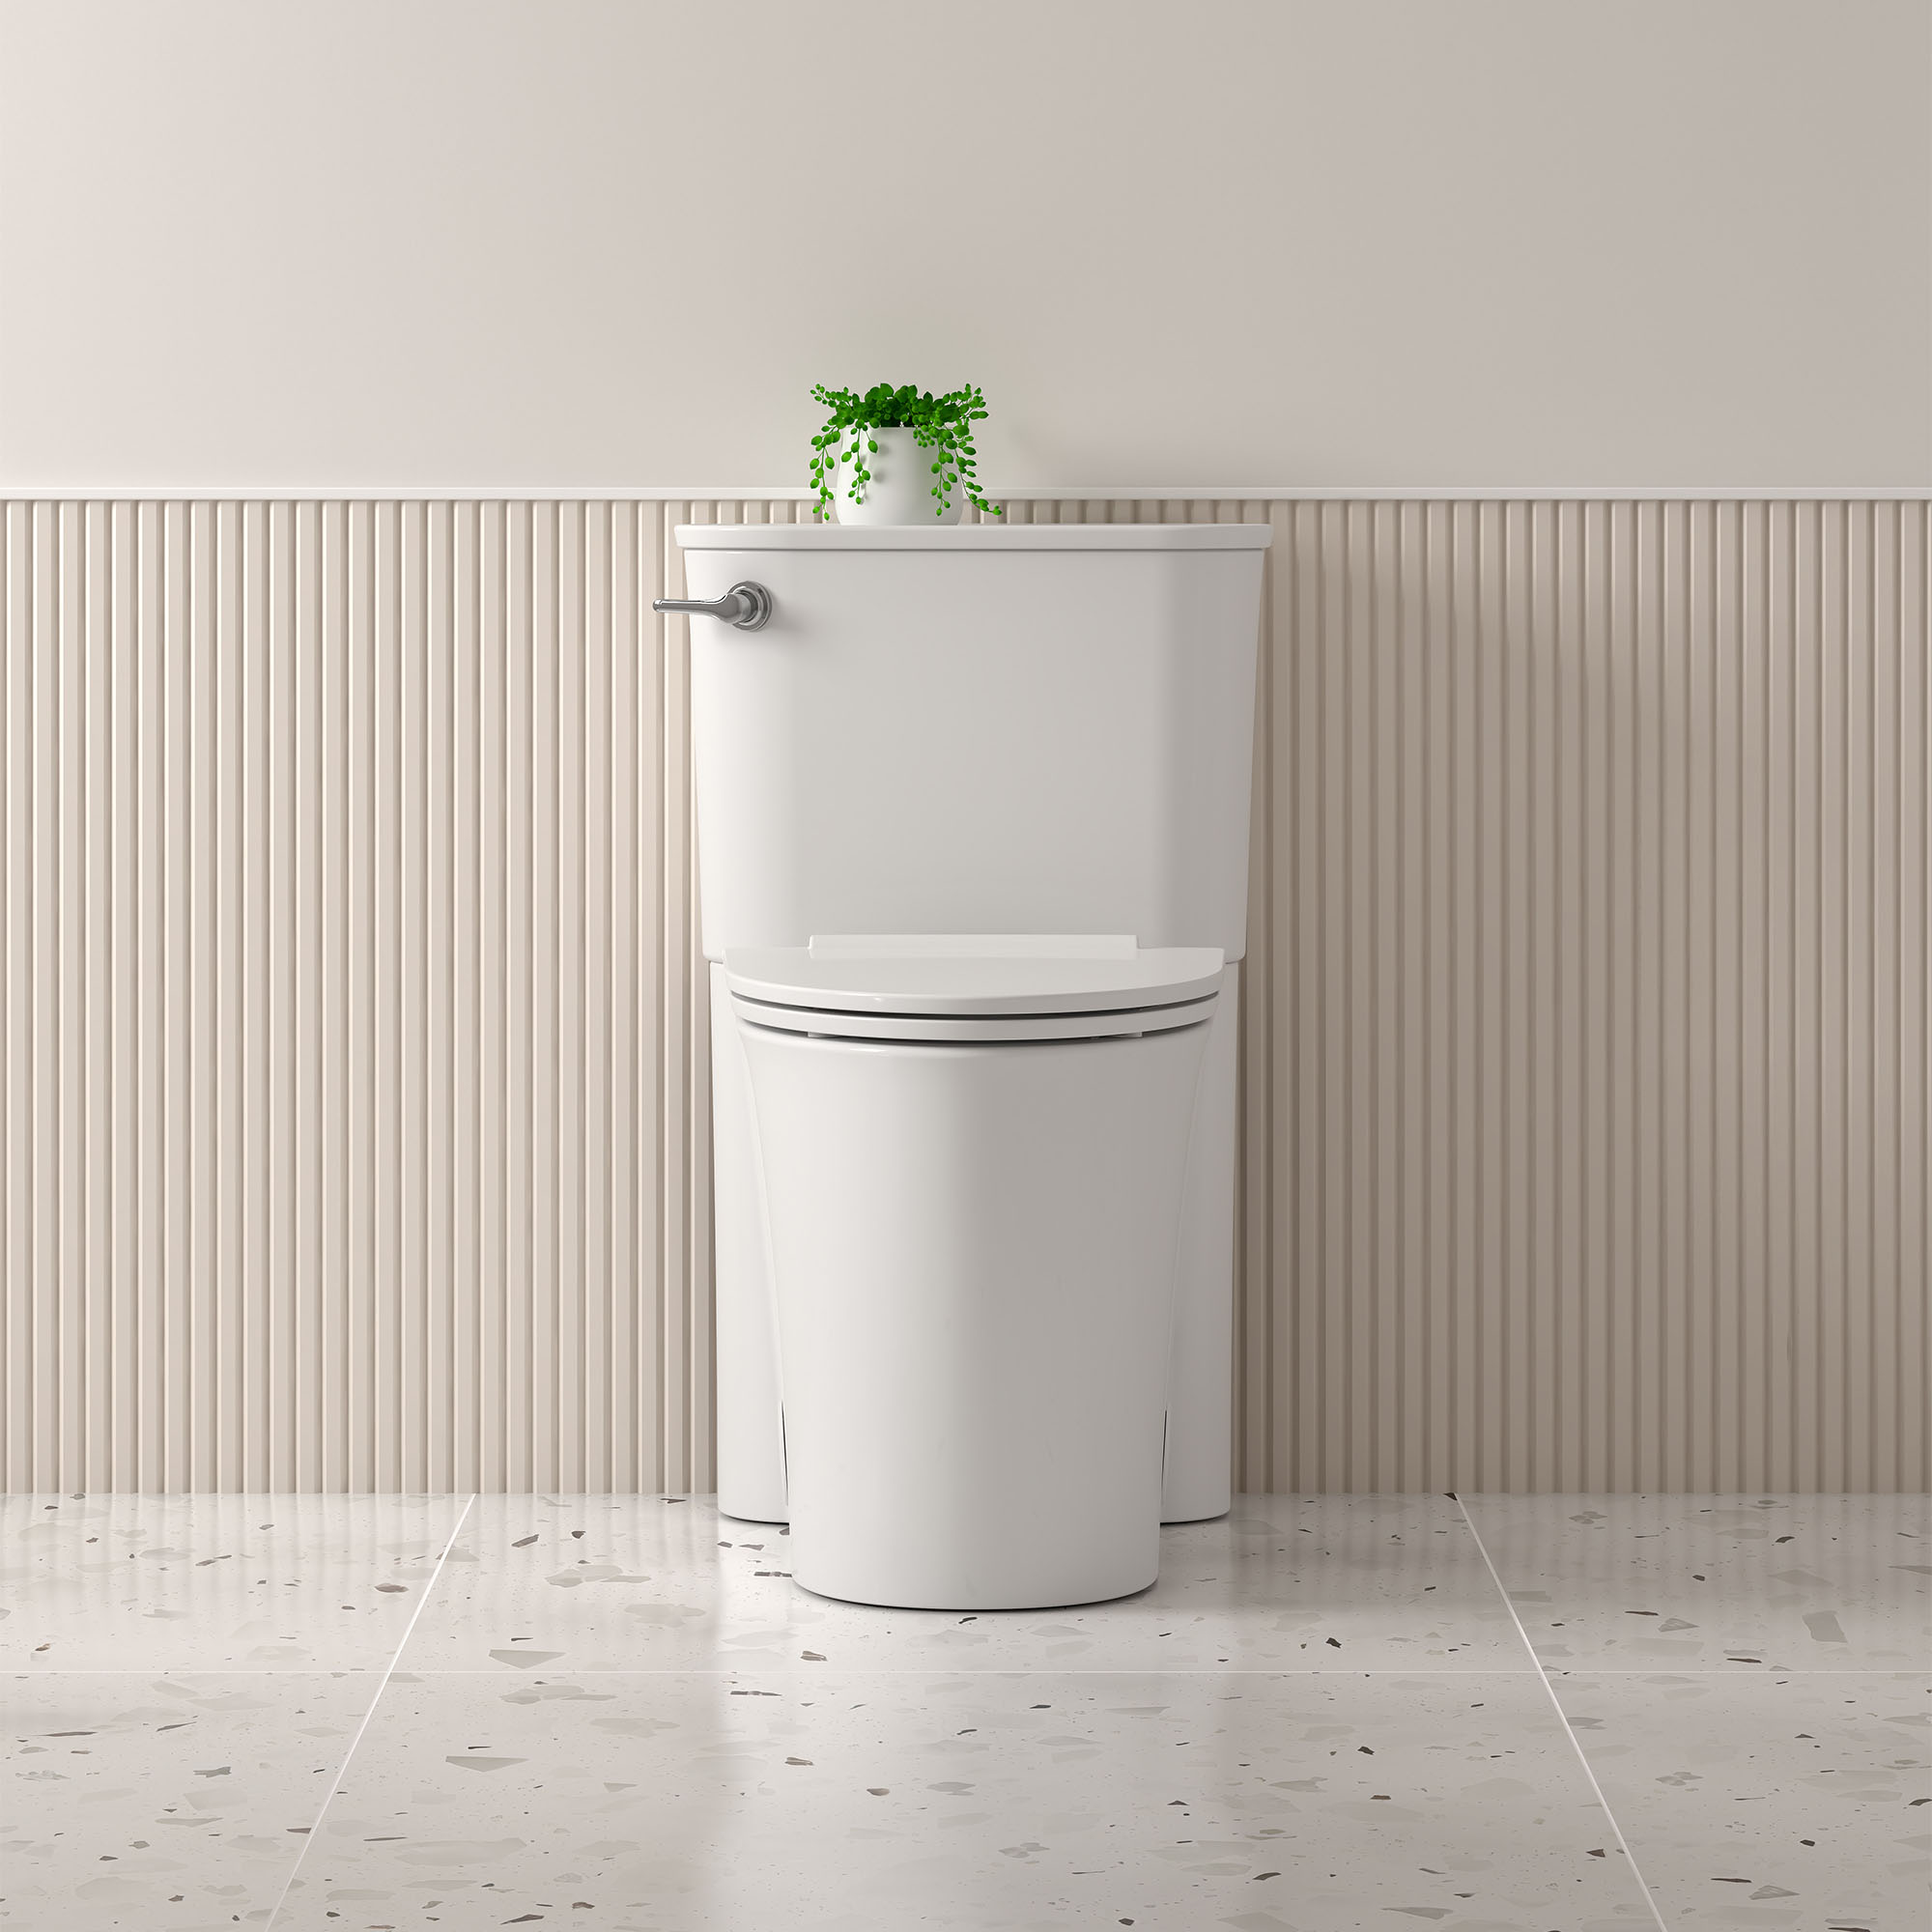 Studio™ S Skirted Two-Piece 1.28 gpf/4.8 Lpf Chair Height Elongated Toilet With Seat